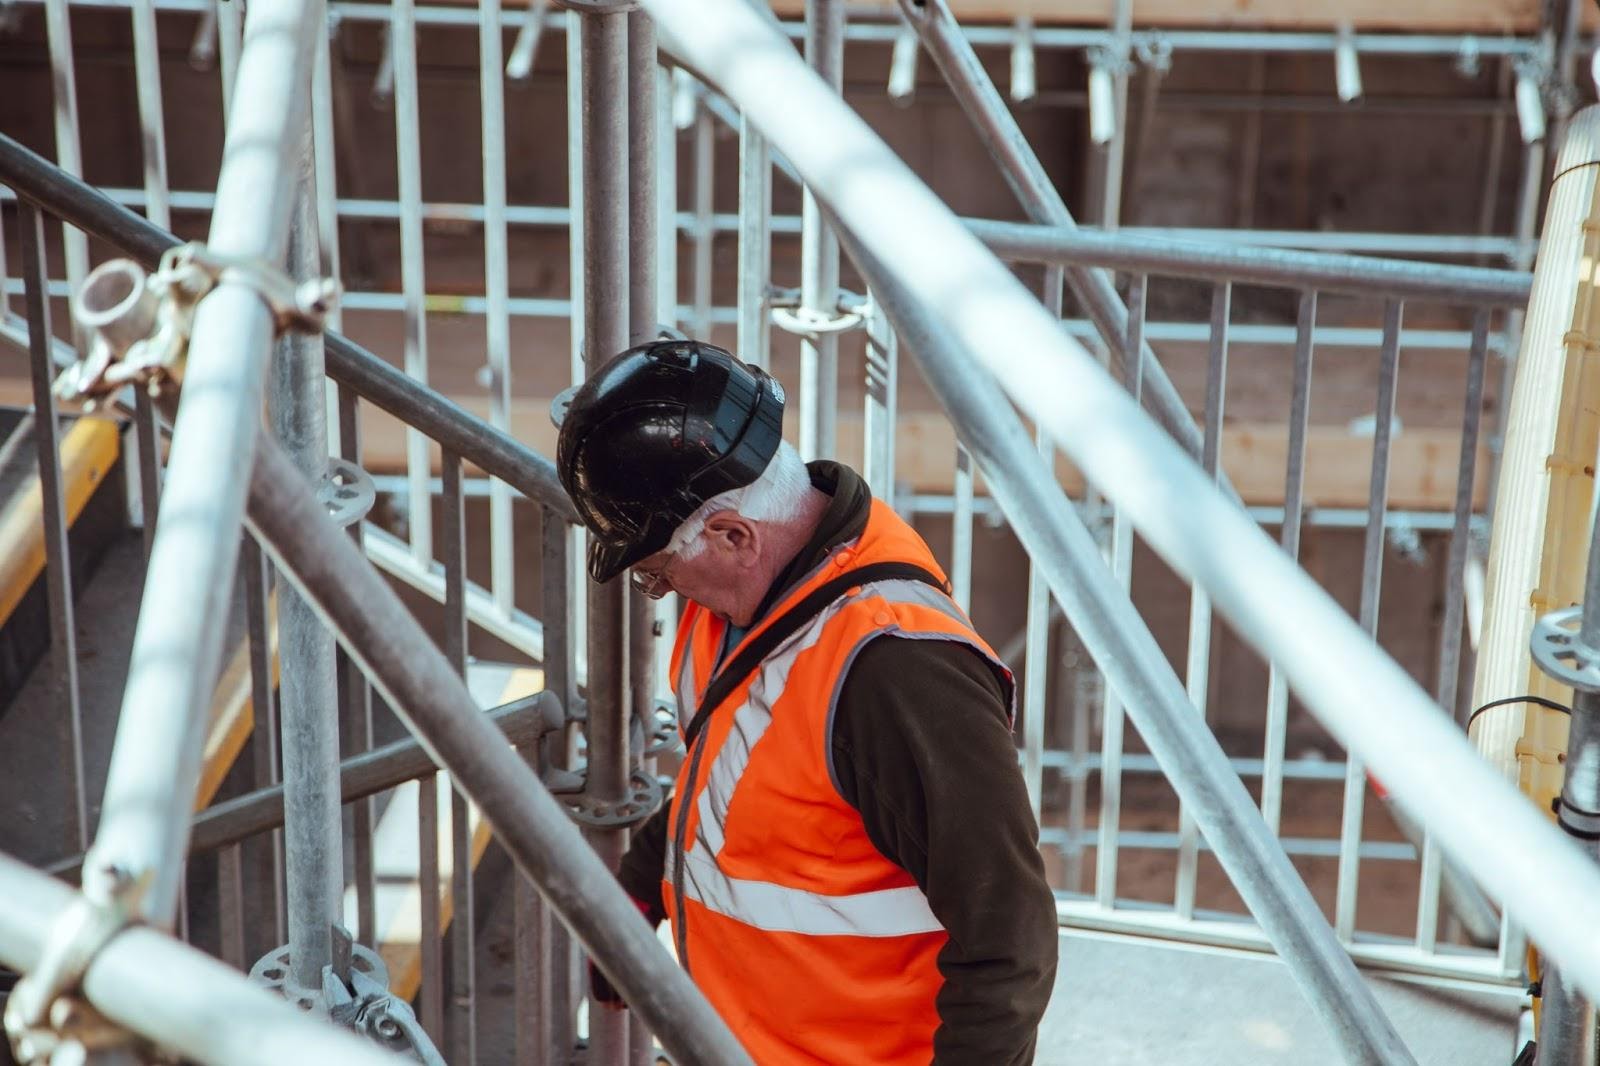 5 Uncommon Reasons for Renting Formwork Instead of Buying